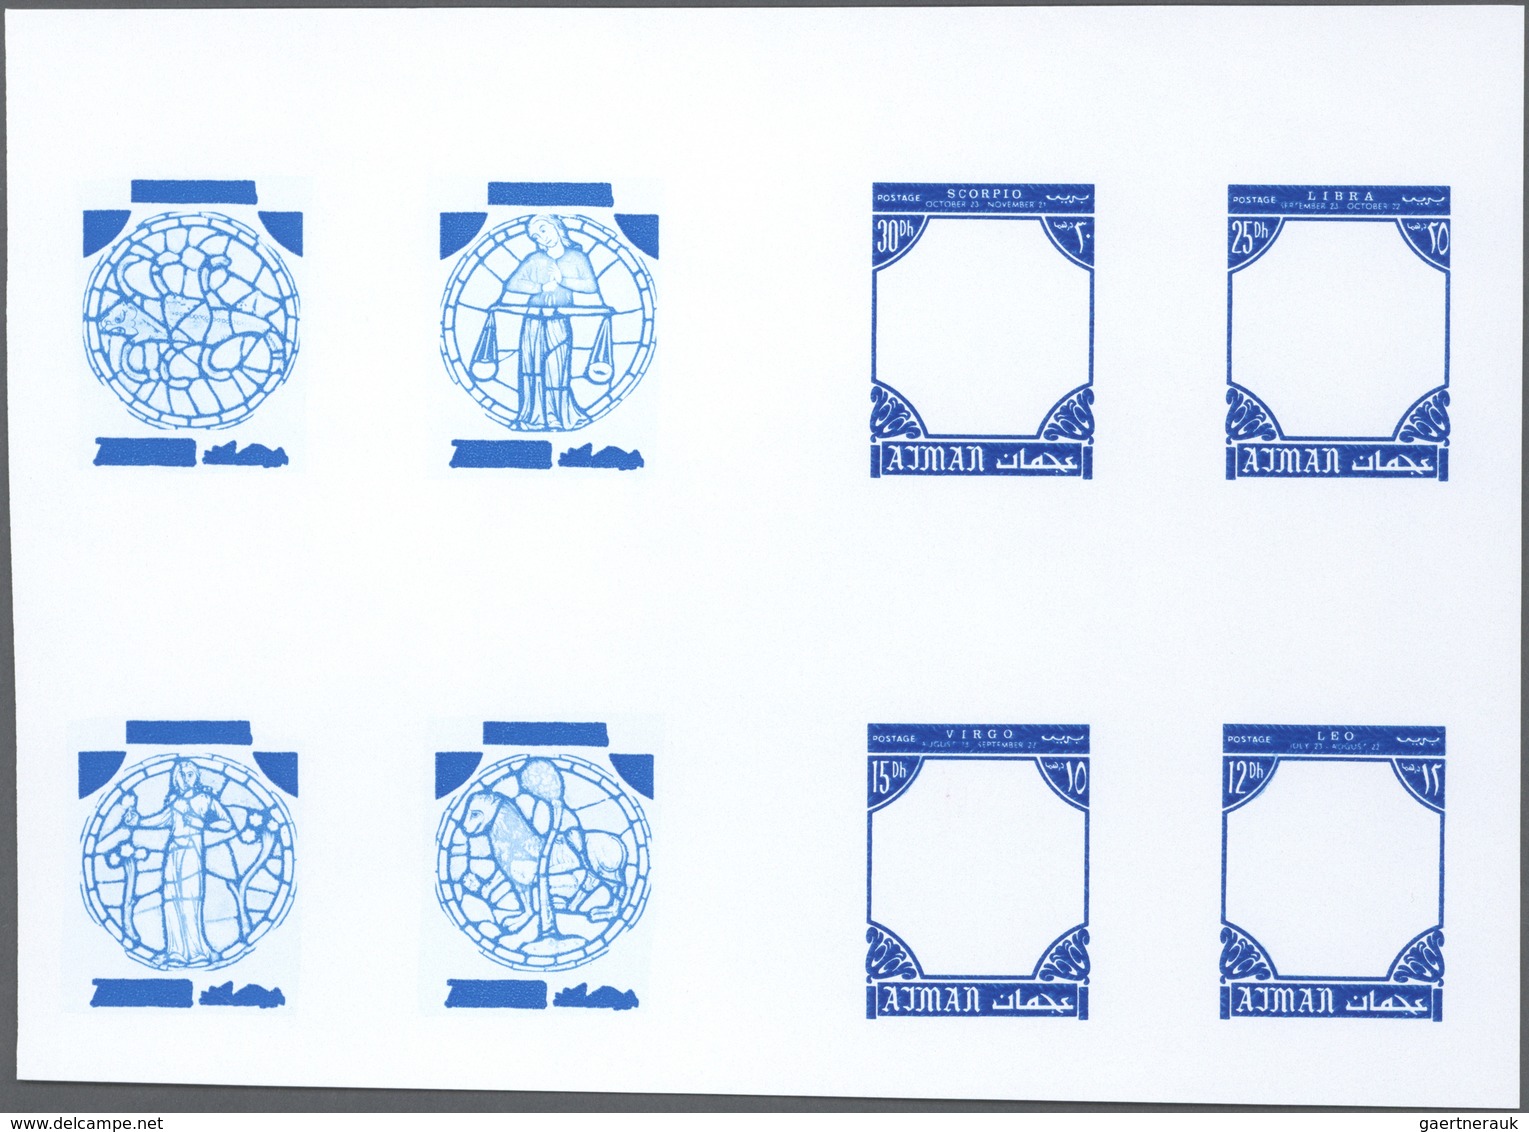 Thematik: Astrologie / astrology: 1971, AJMAN: Signs of the Zodiac two complete sets of twelve value